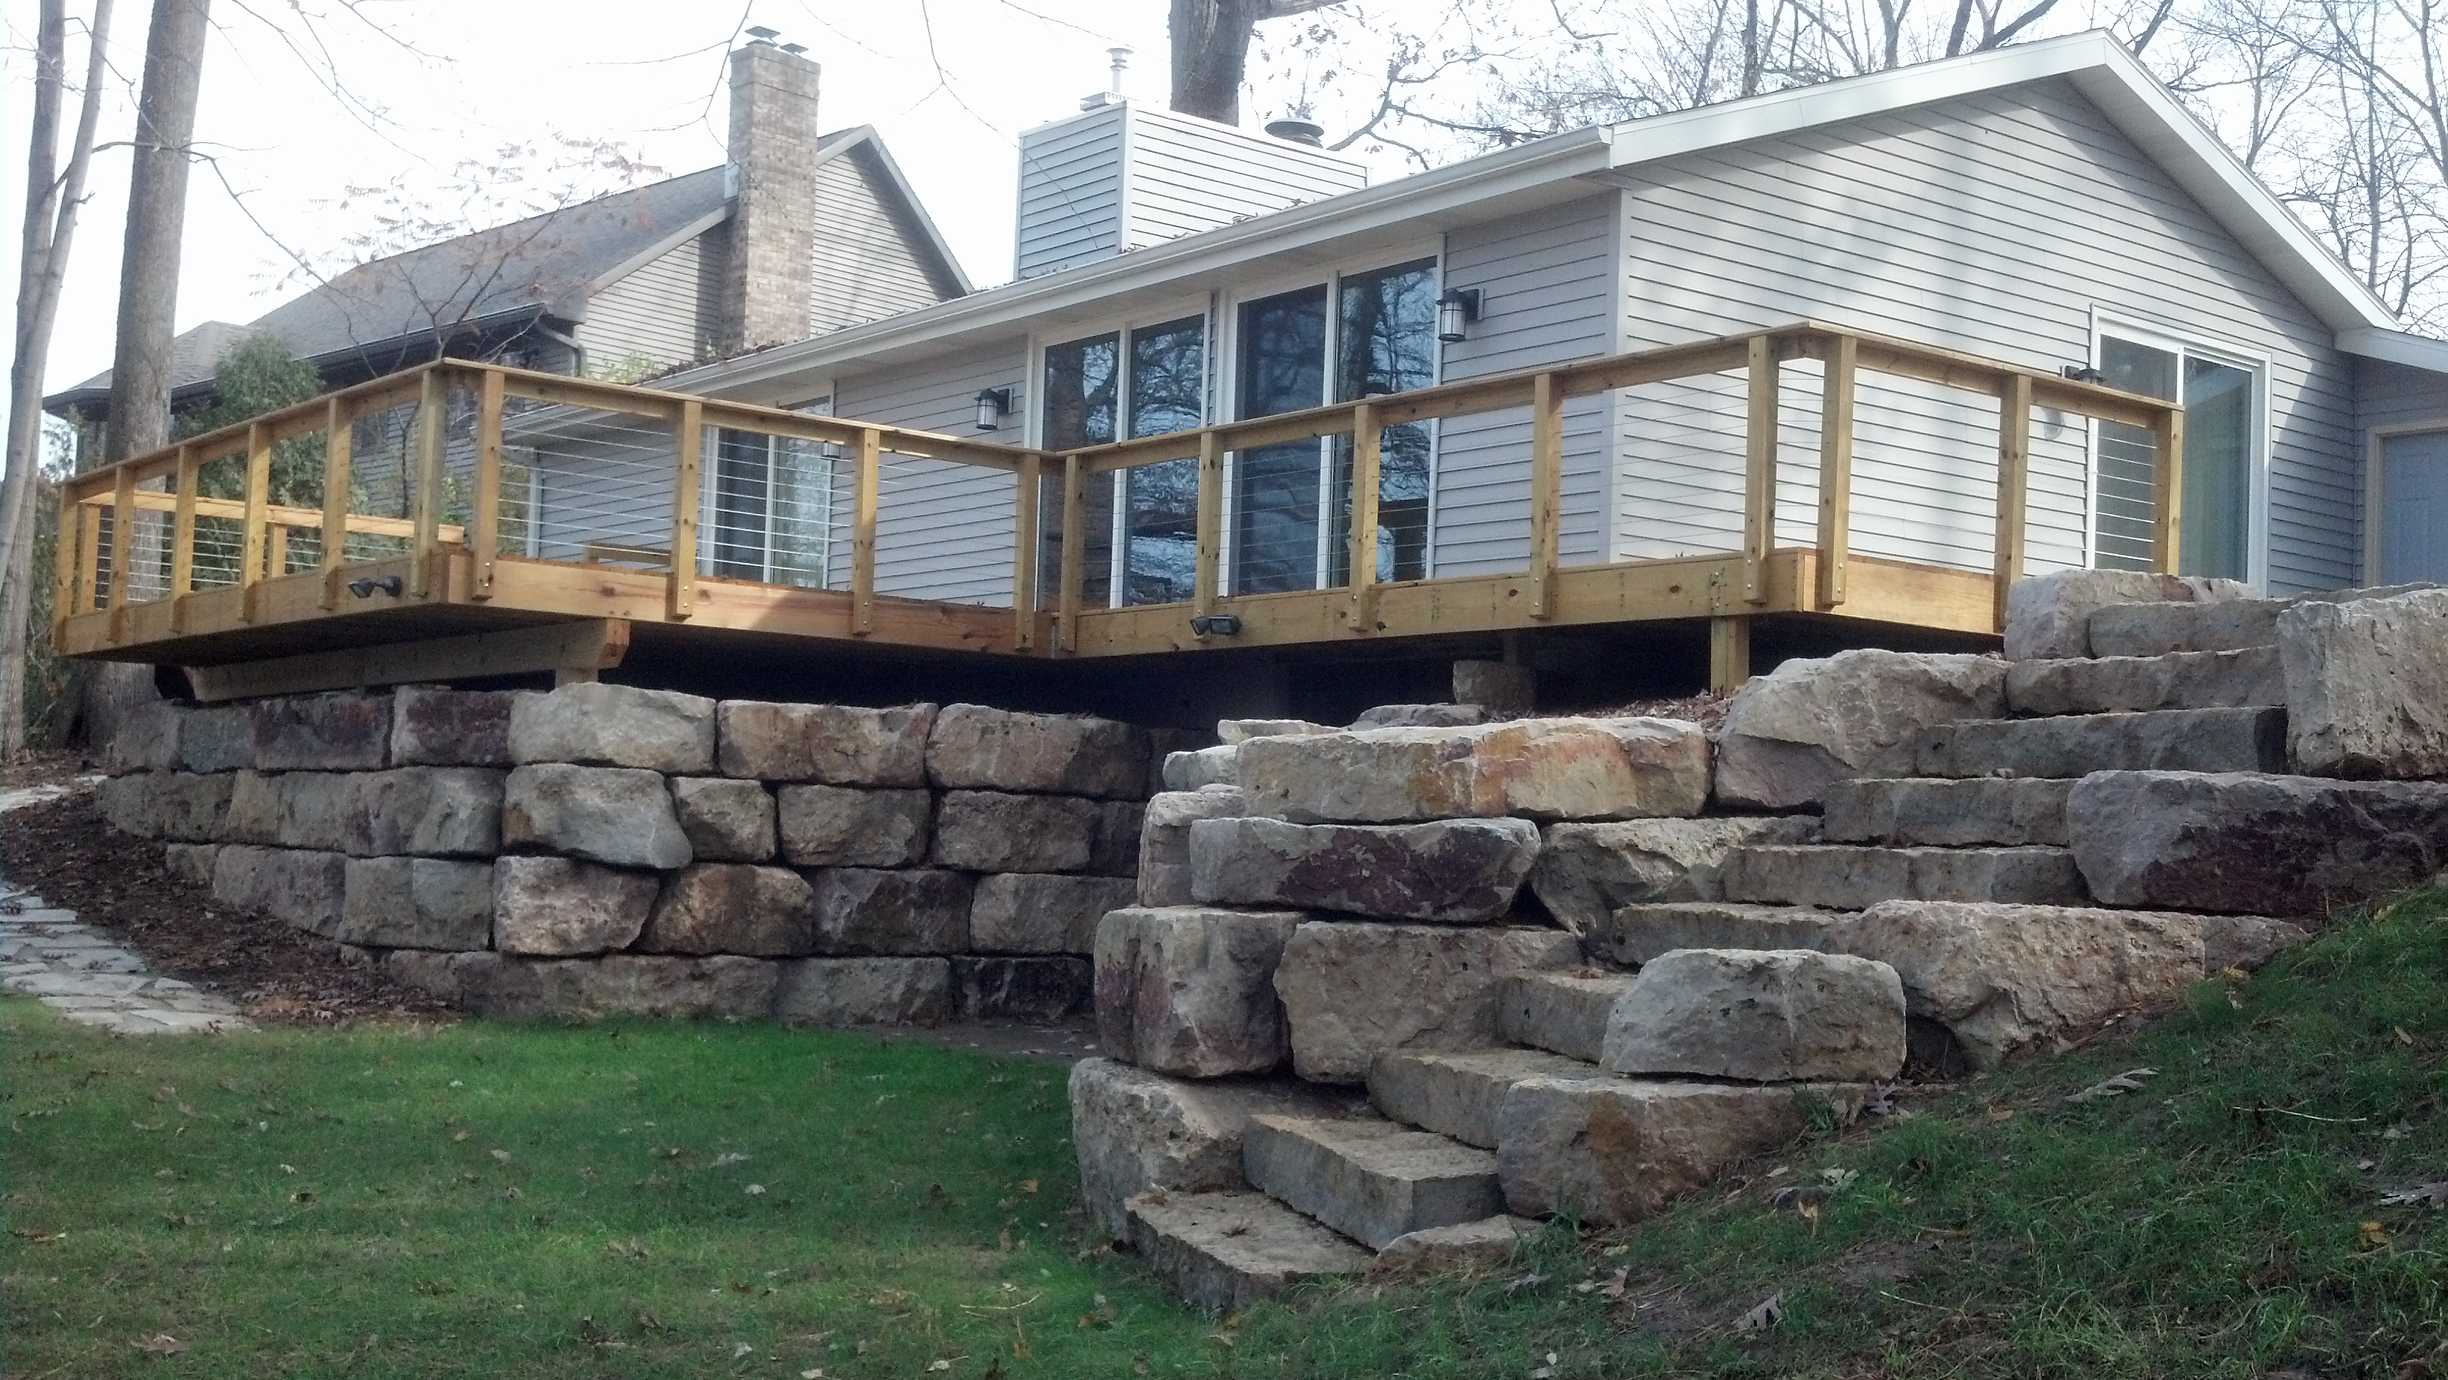 stacked rock retaining walls supporting wooden deck along house